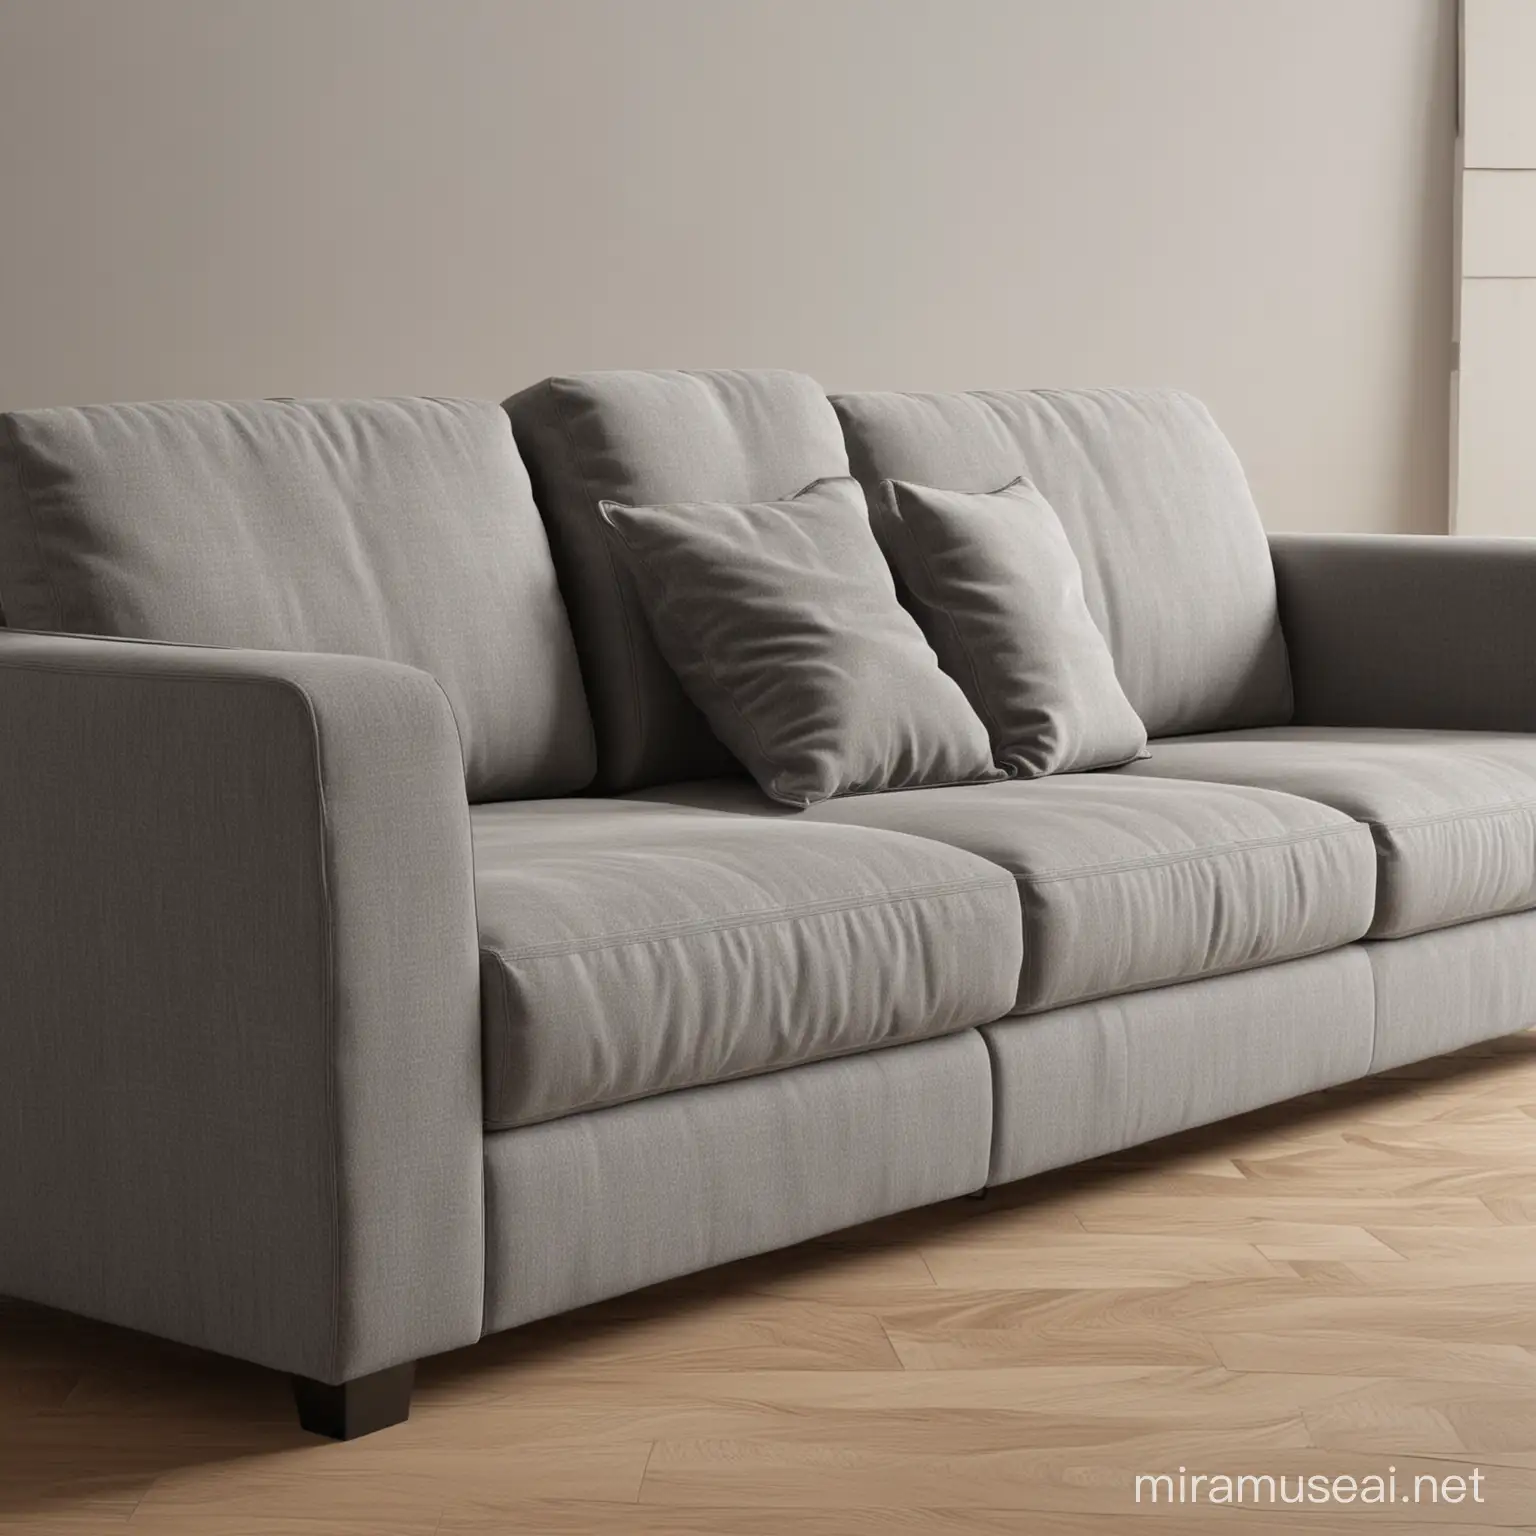 Futuristic Anthracite PShaped Sofa with Minimalist Aesthetic and Mechanical Arm Detail